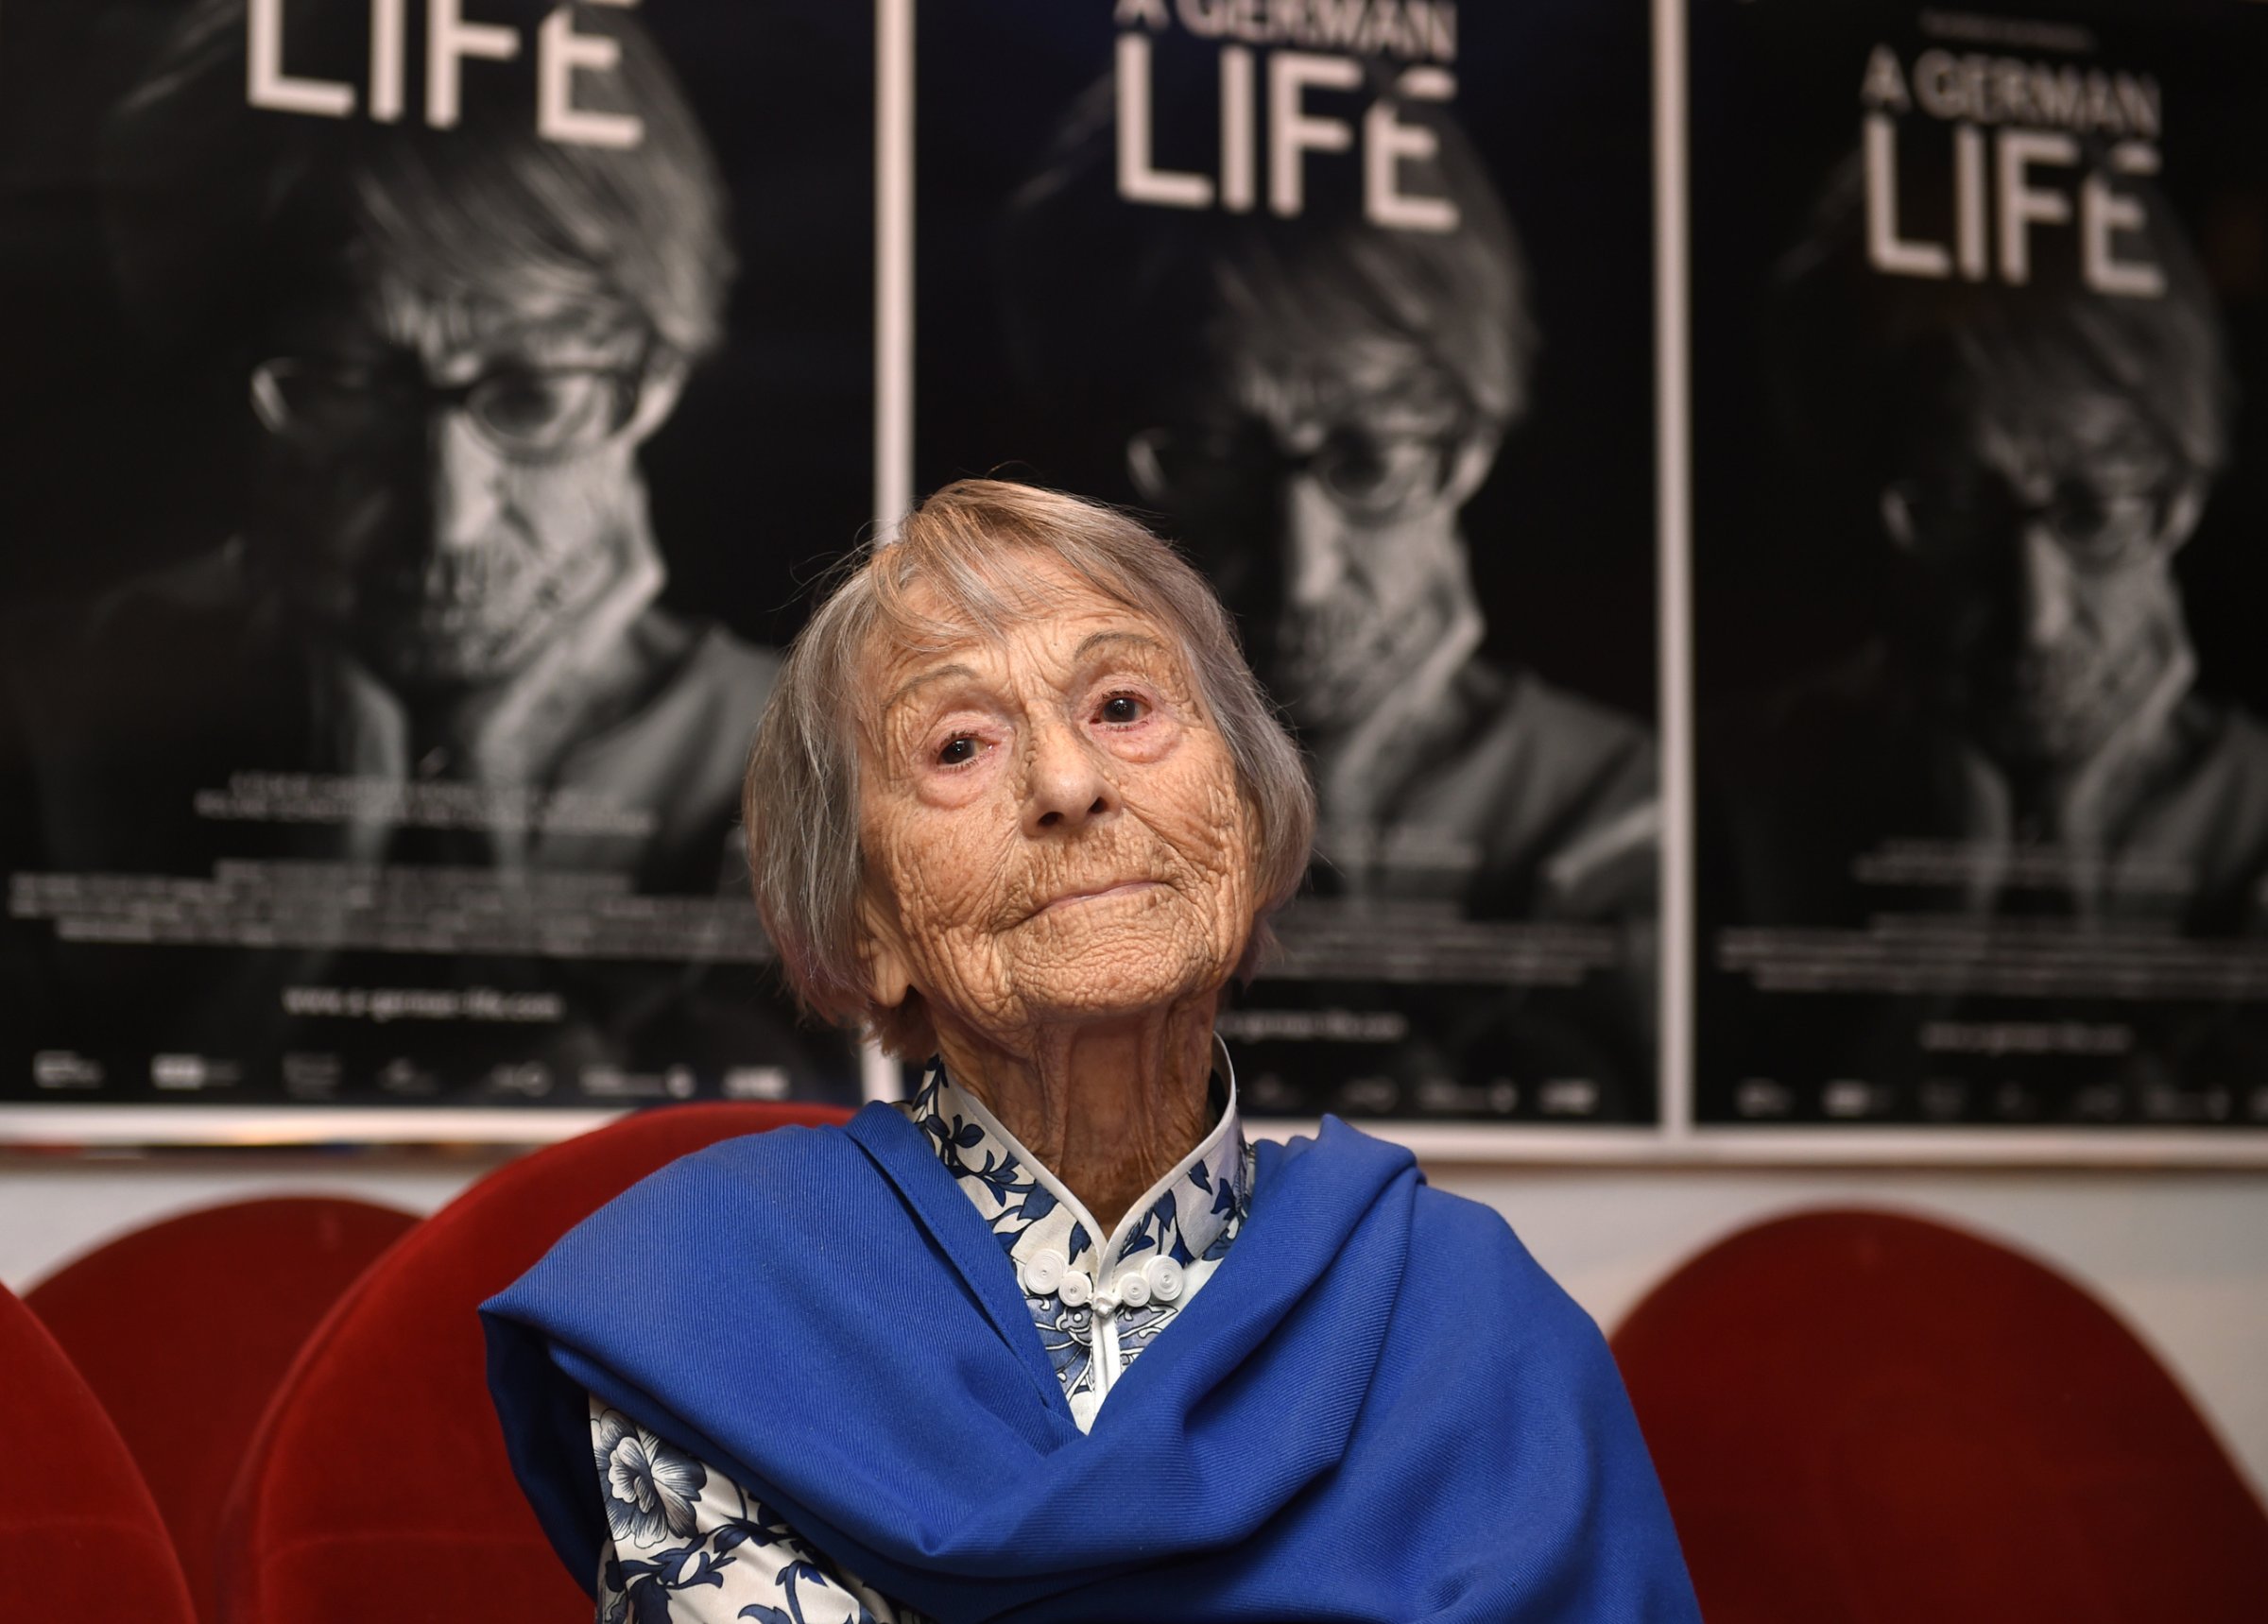 Brunhilde Pomsel, former secretary of Nazi propaganda chief Joseph Goebbels, sits on a cinema chair in front of posters for the movie "A German life" in a cinema in Munich, southern Germany, on June 29, 2016.